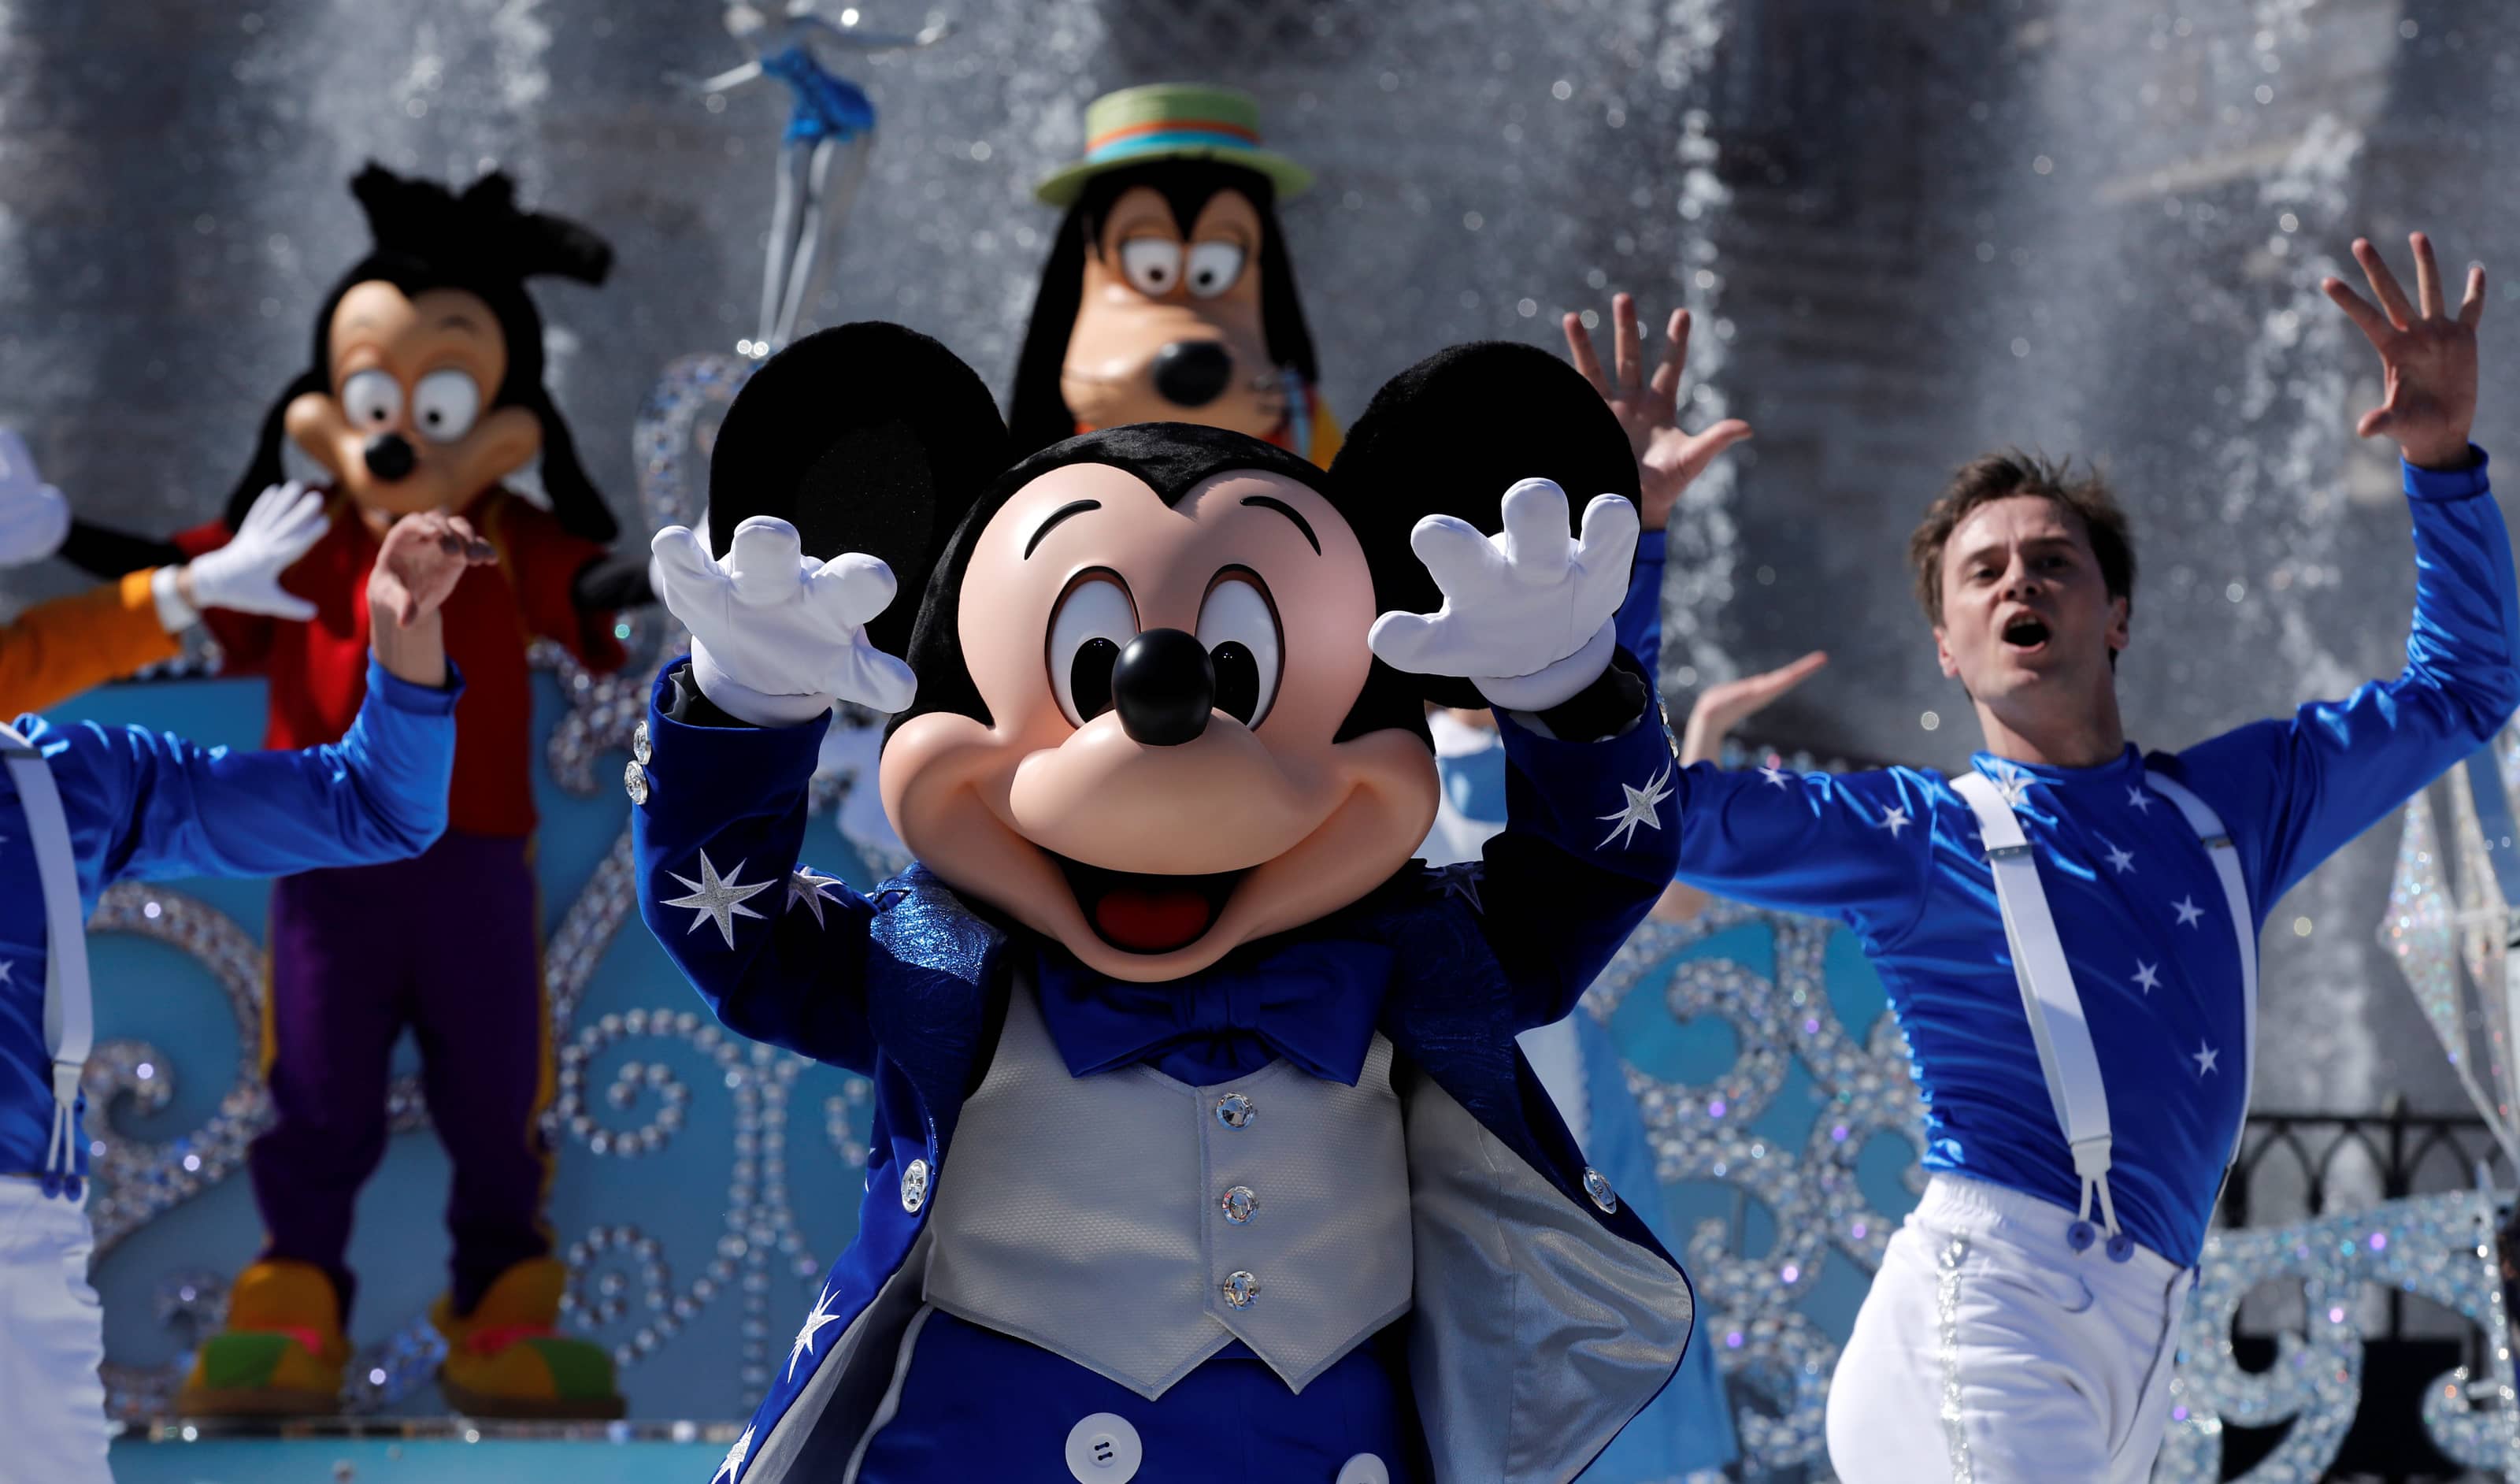 disney-character-mickey-mouse-attends-the-25th-anniversary-of-disneyland-paris-at-the-park-in-marne-la-vallee-near-paris